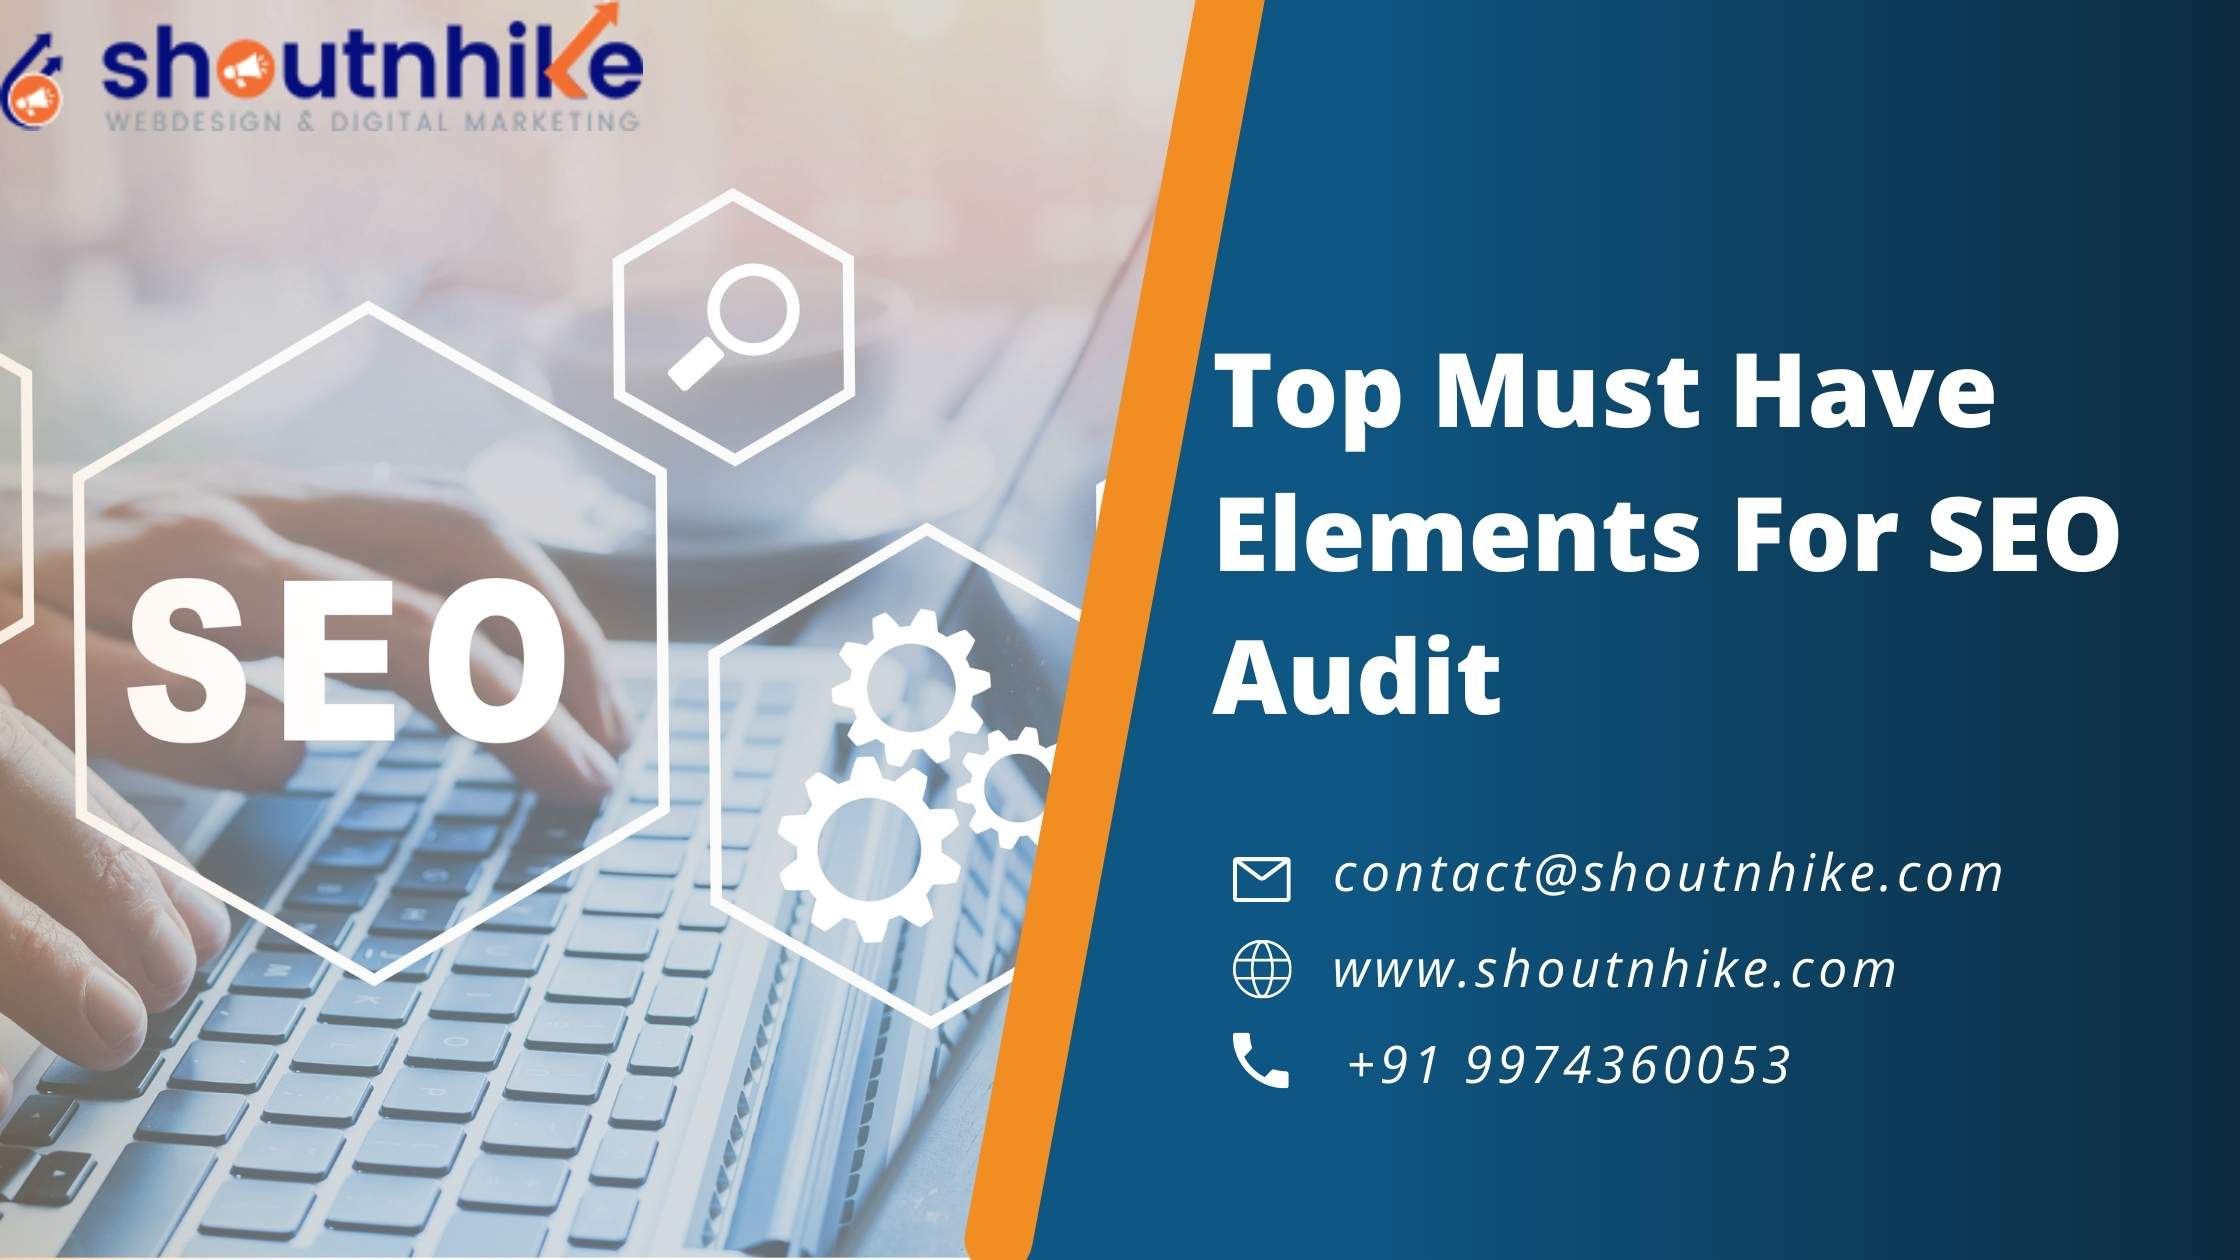 Top Must Have Elements For SEO Audit